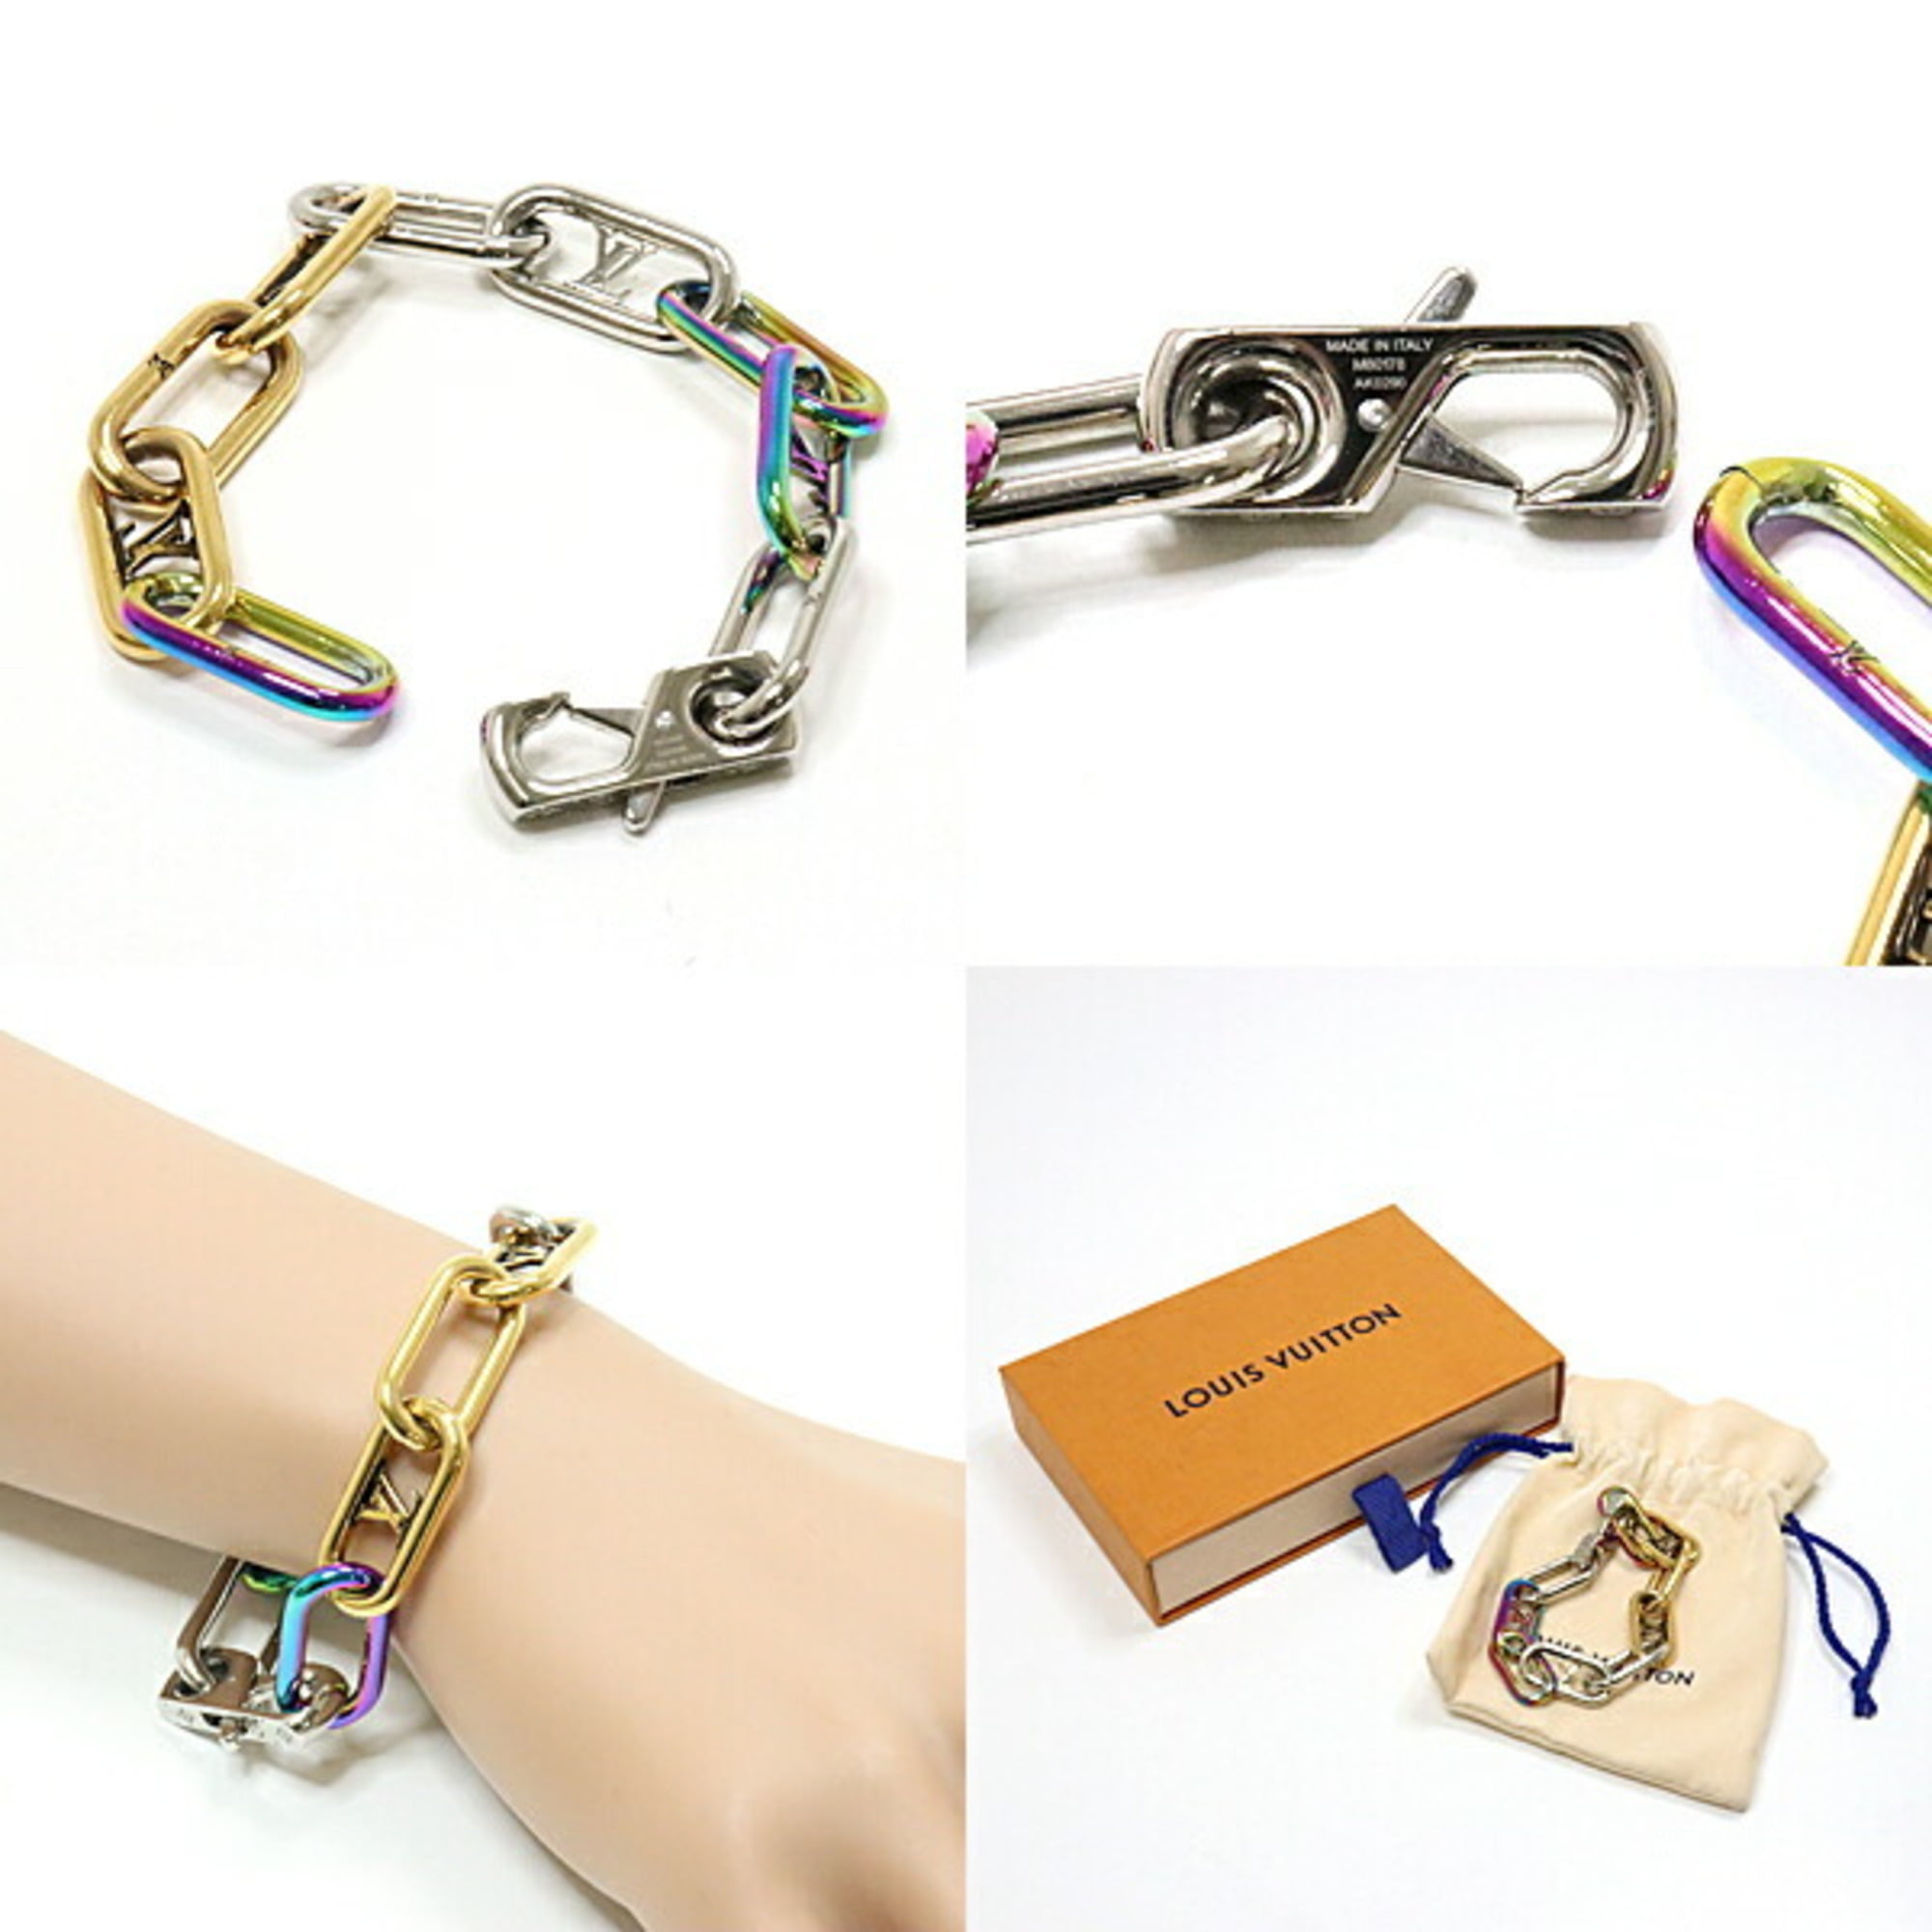 Authenticated used Louis Vuitton Monogram M80178 Metal Charm Bracelet Gold,Silver, Women's, Size: One size, Grey Type